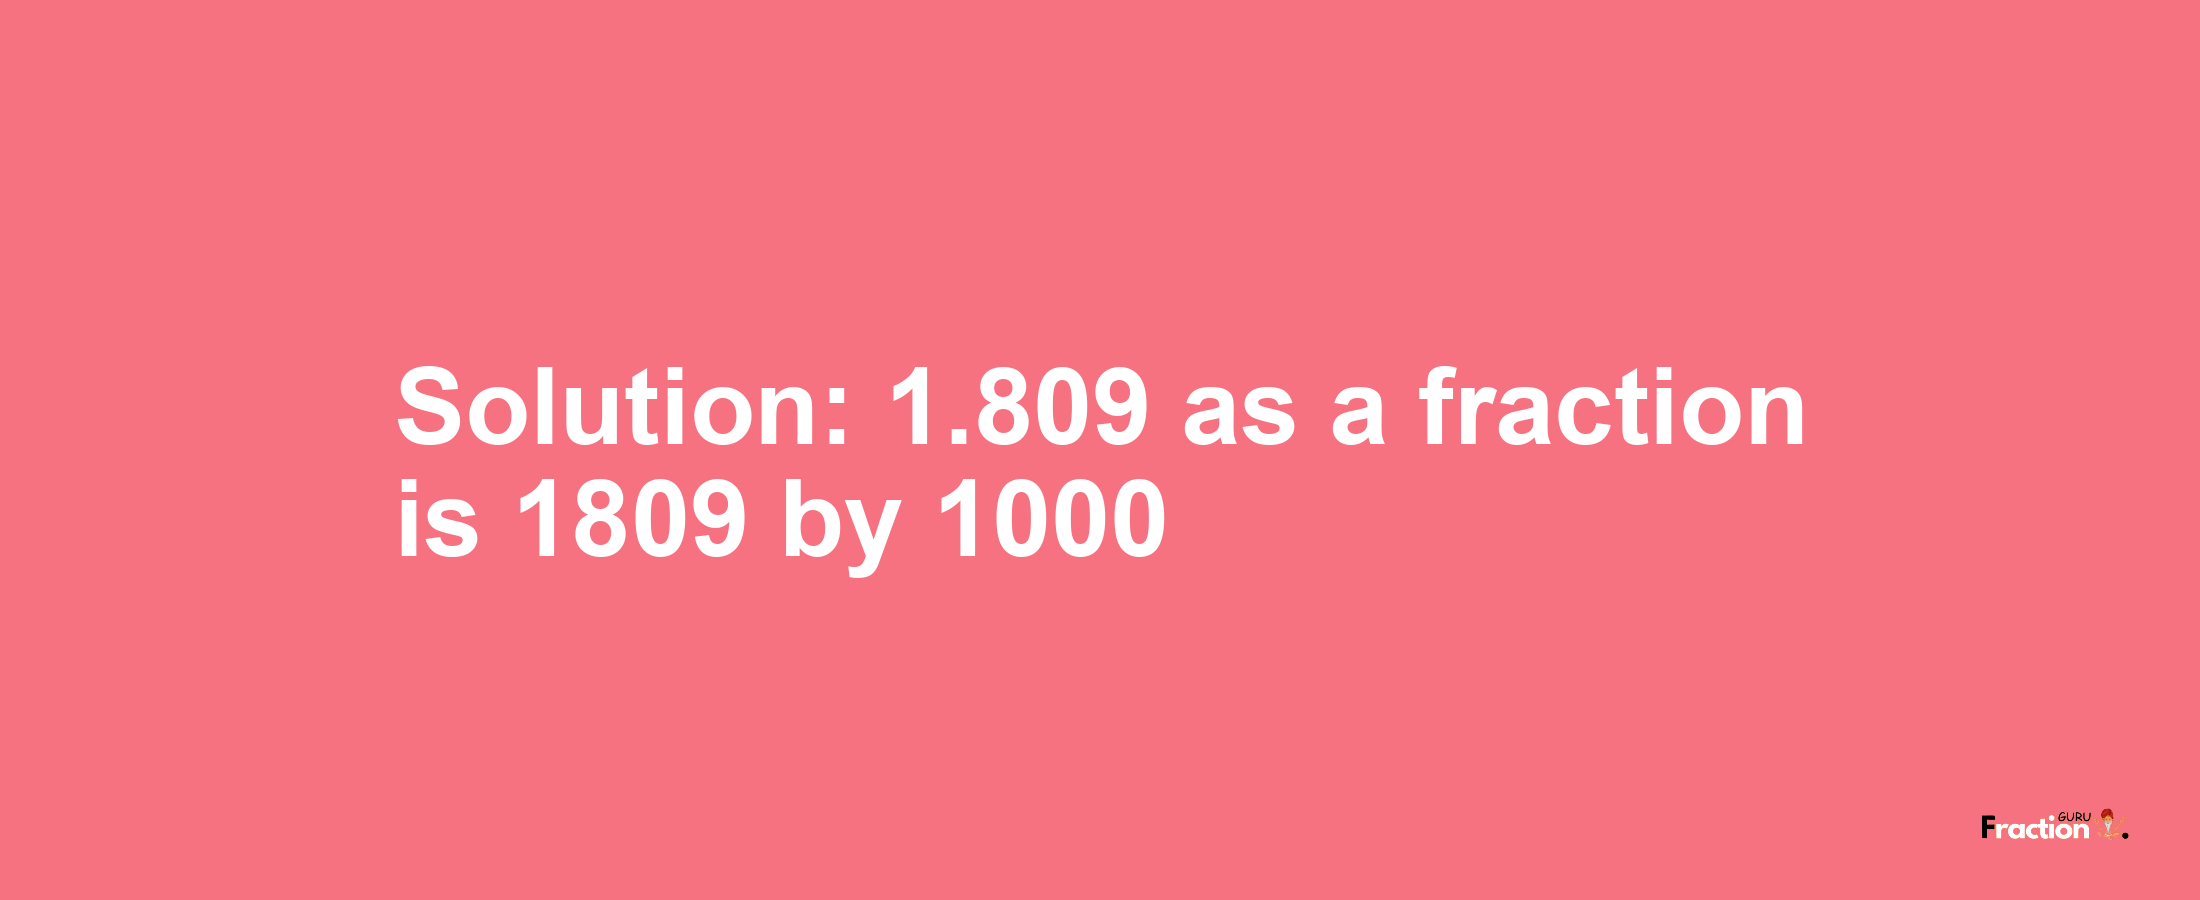 Solution:1.809 as a fraction is 1809/1000